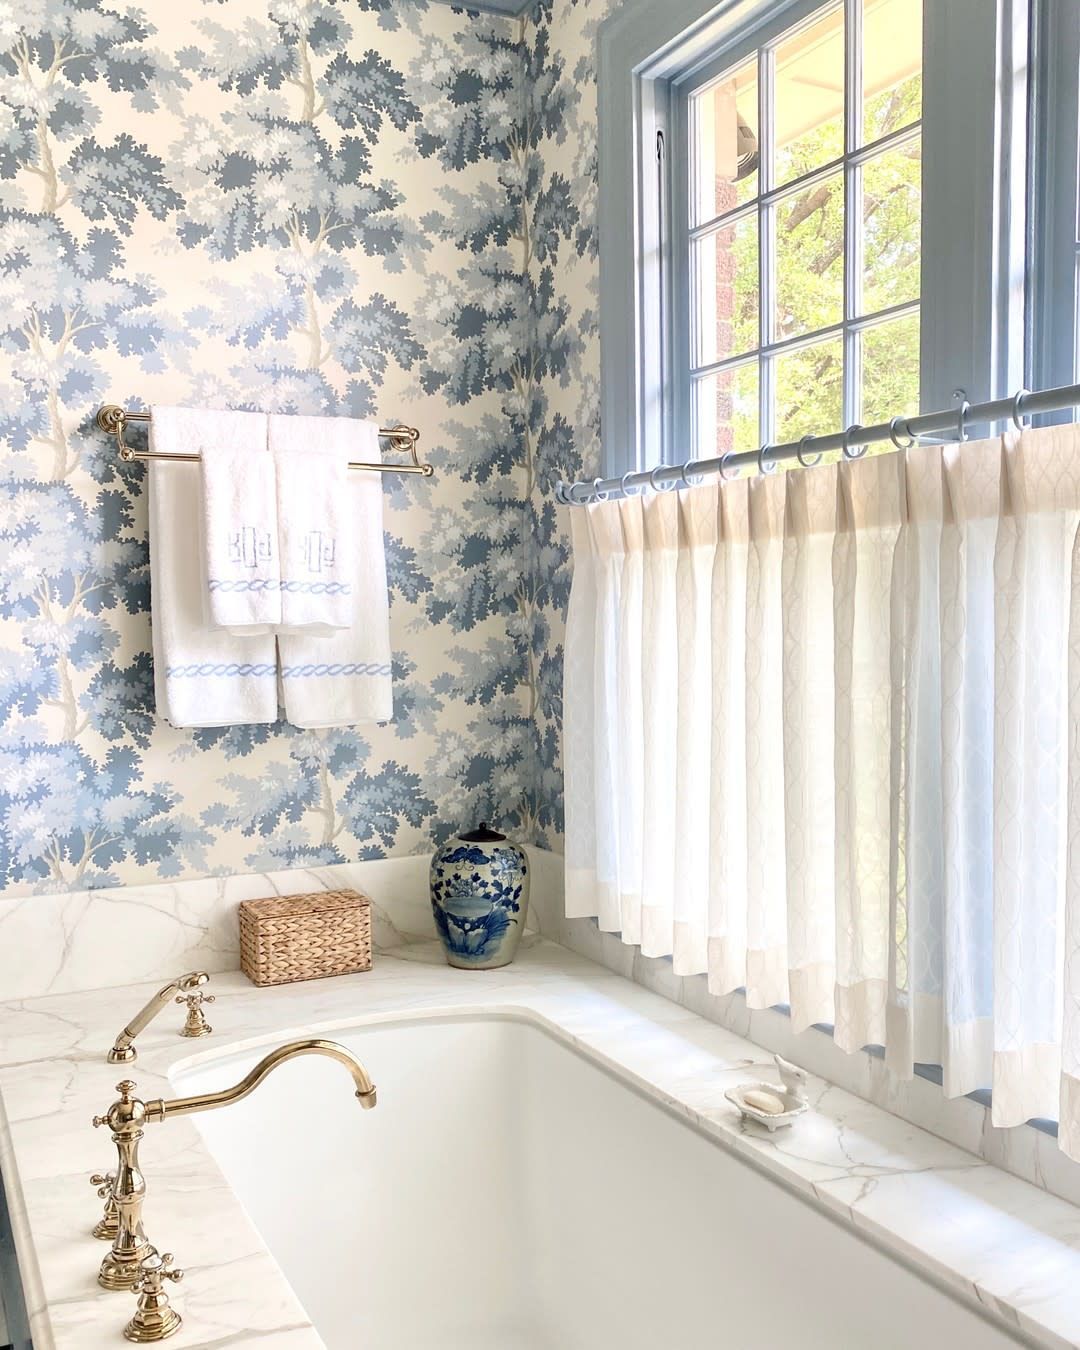 Bathroom Curtains: Add Privacy and Style to Your Bathroom with Stylish Curtains